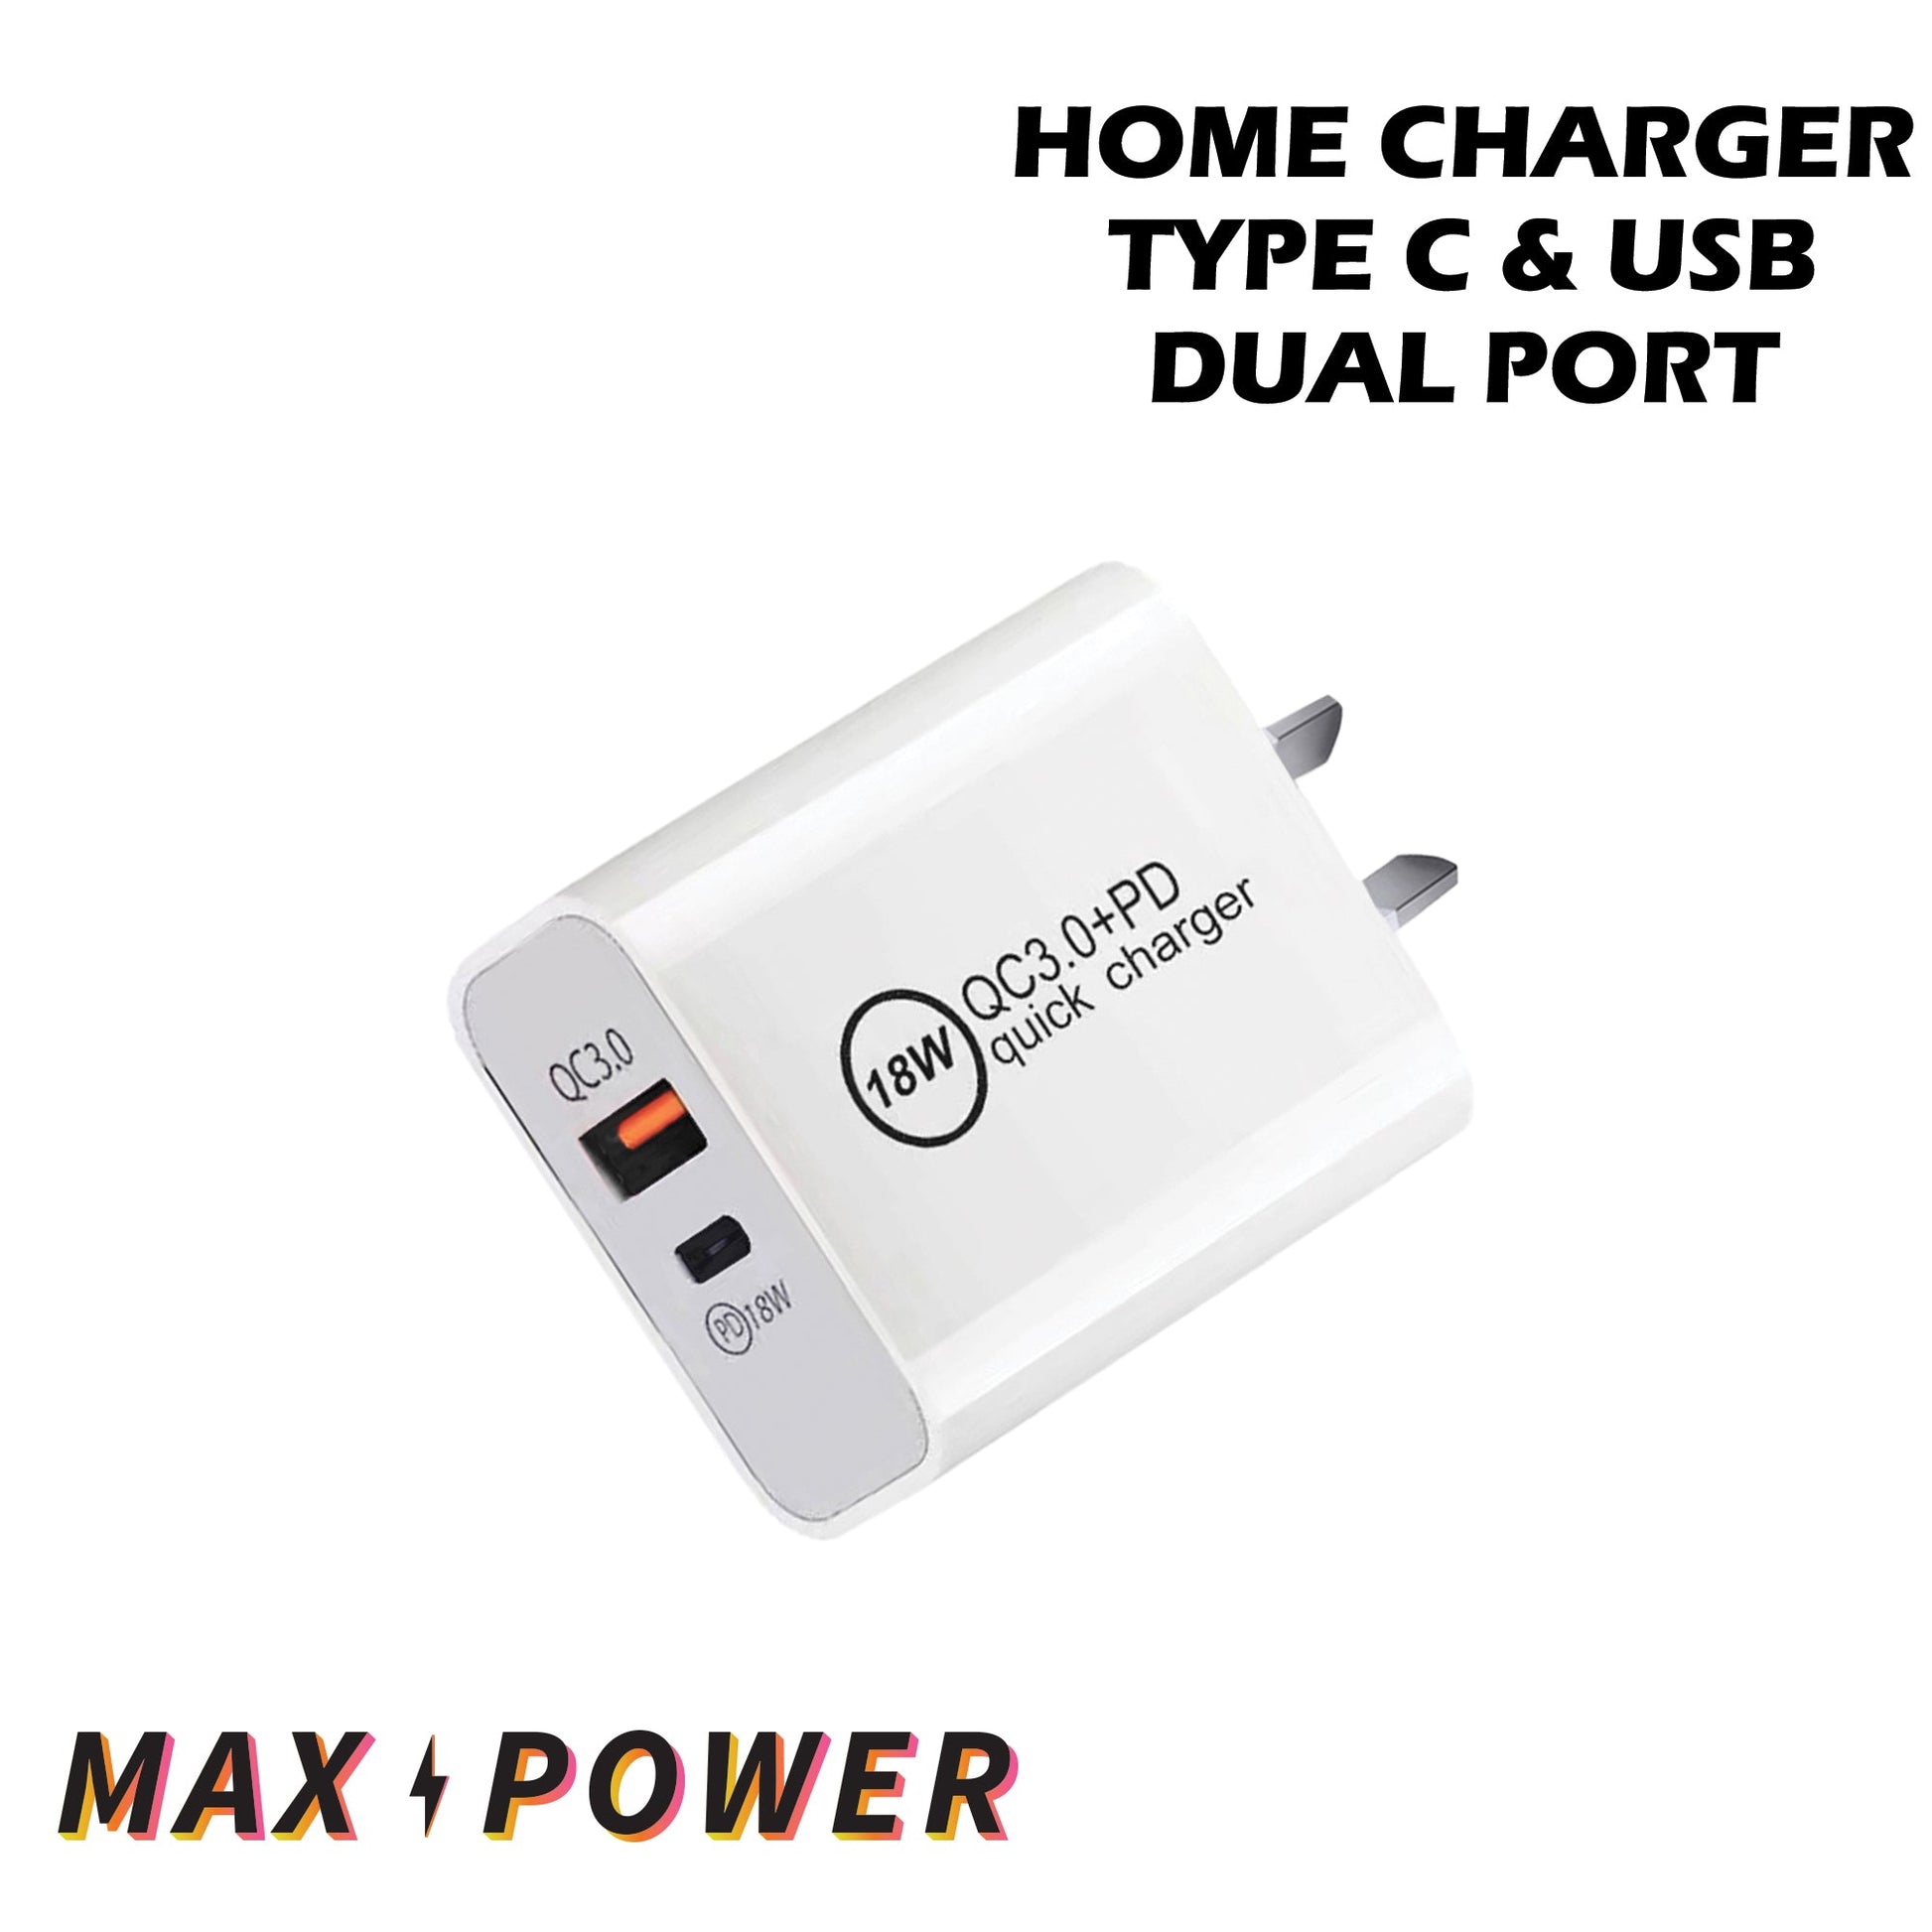 Max Power - Home Charger Type C & USB Dual Port Ace Trading Canada